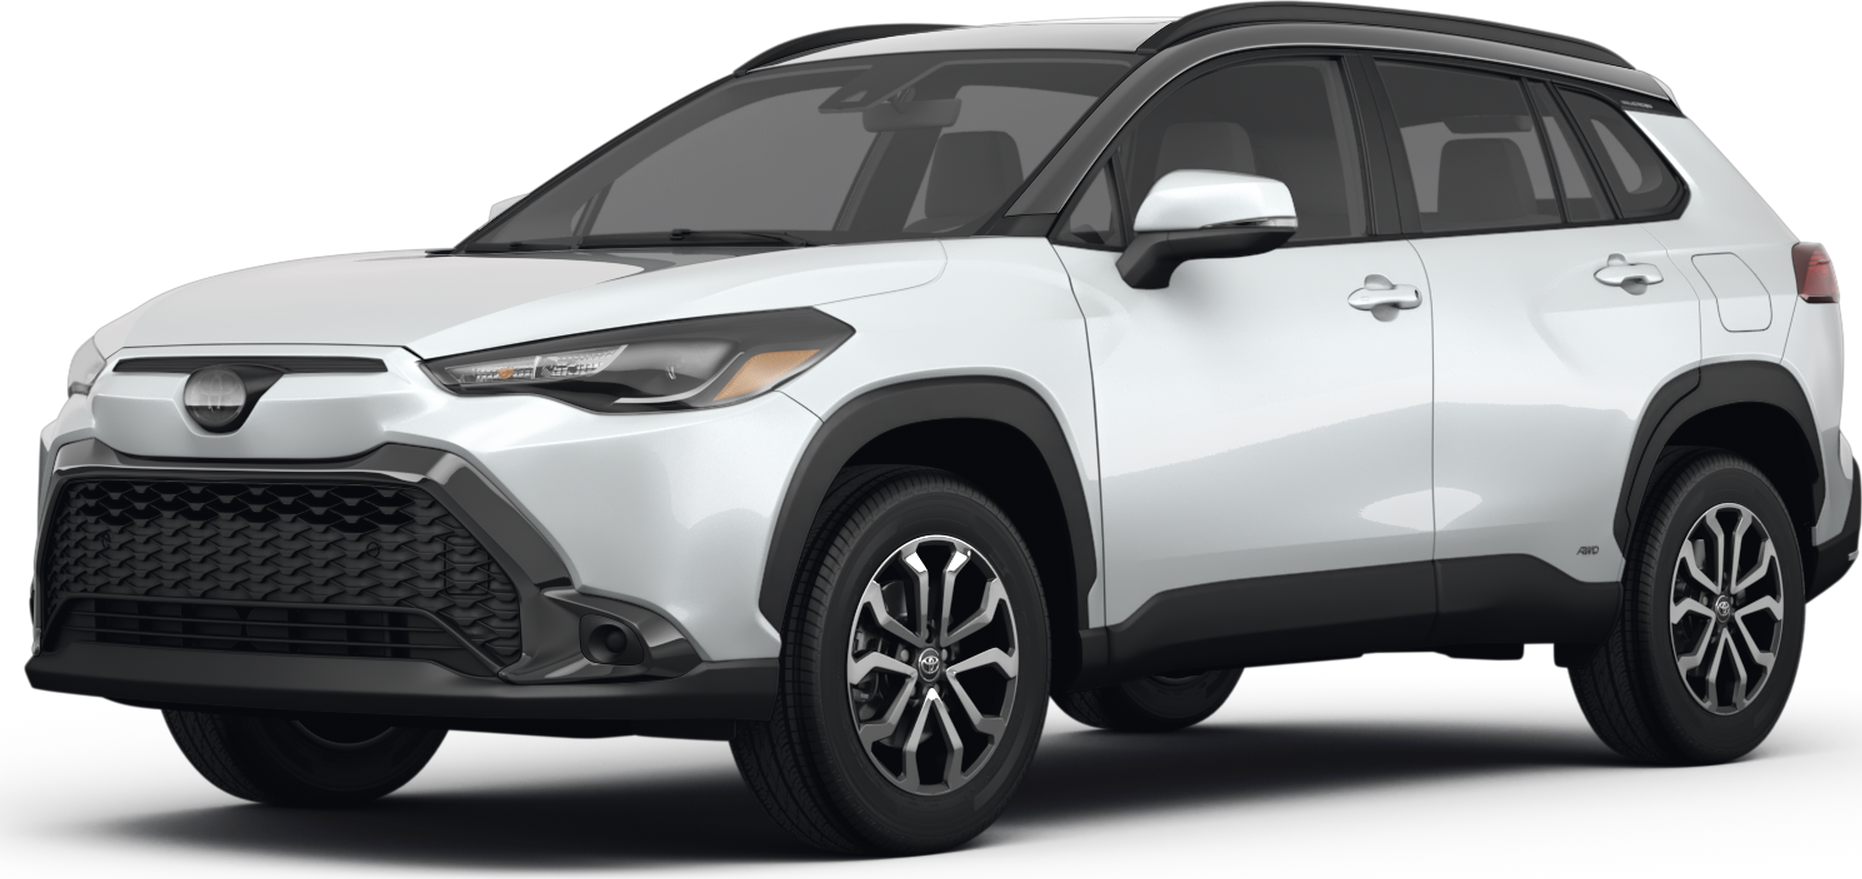 https://file.kelleybluebookimages.com/kbb/base/evox/CP/50784/2023-Toyota-Corolla%20Cross%20Hybrid-front_50784_032_1862x879_089_cropped.png